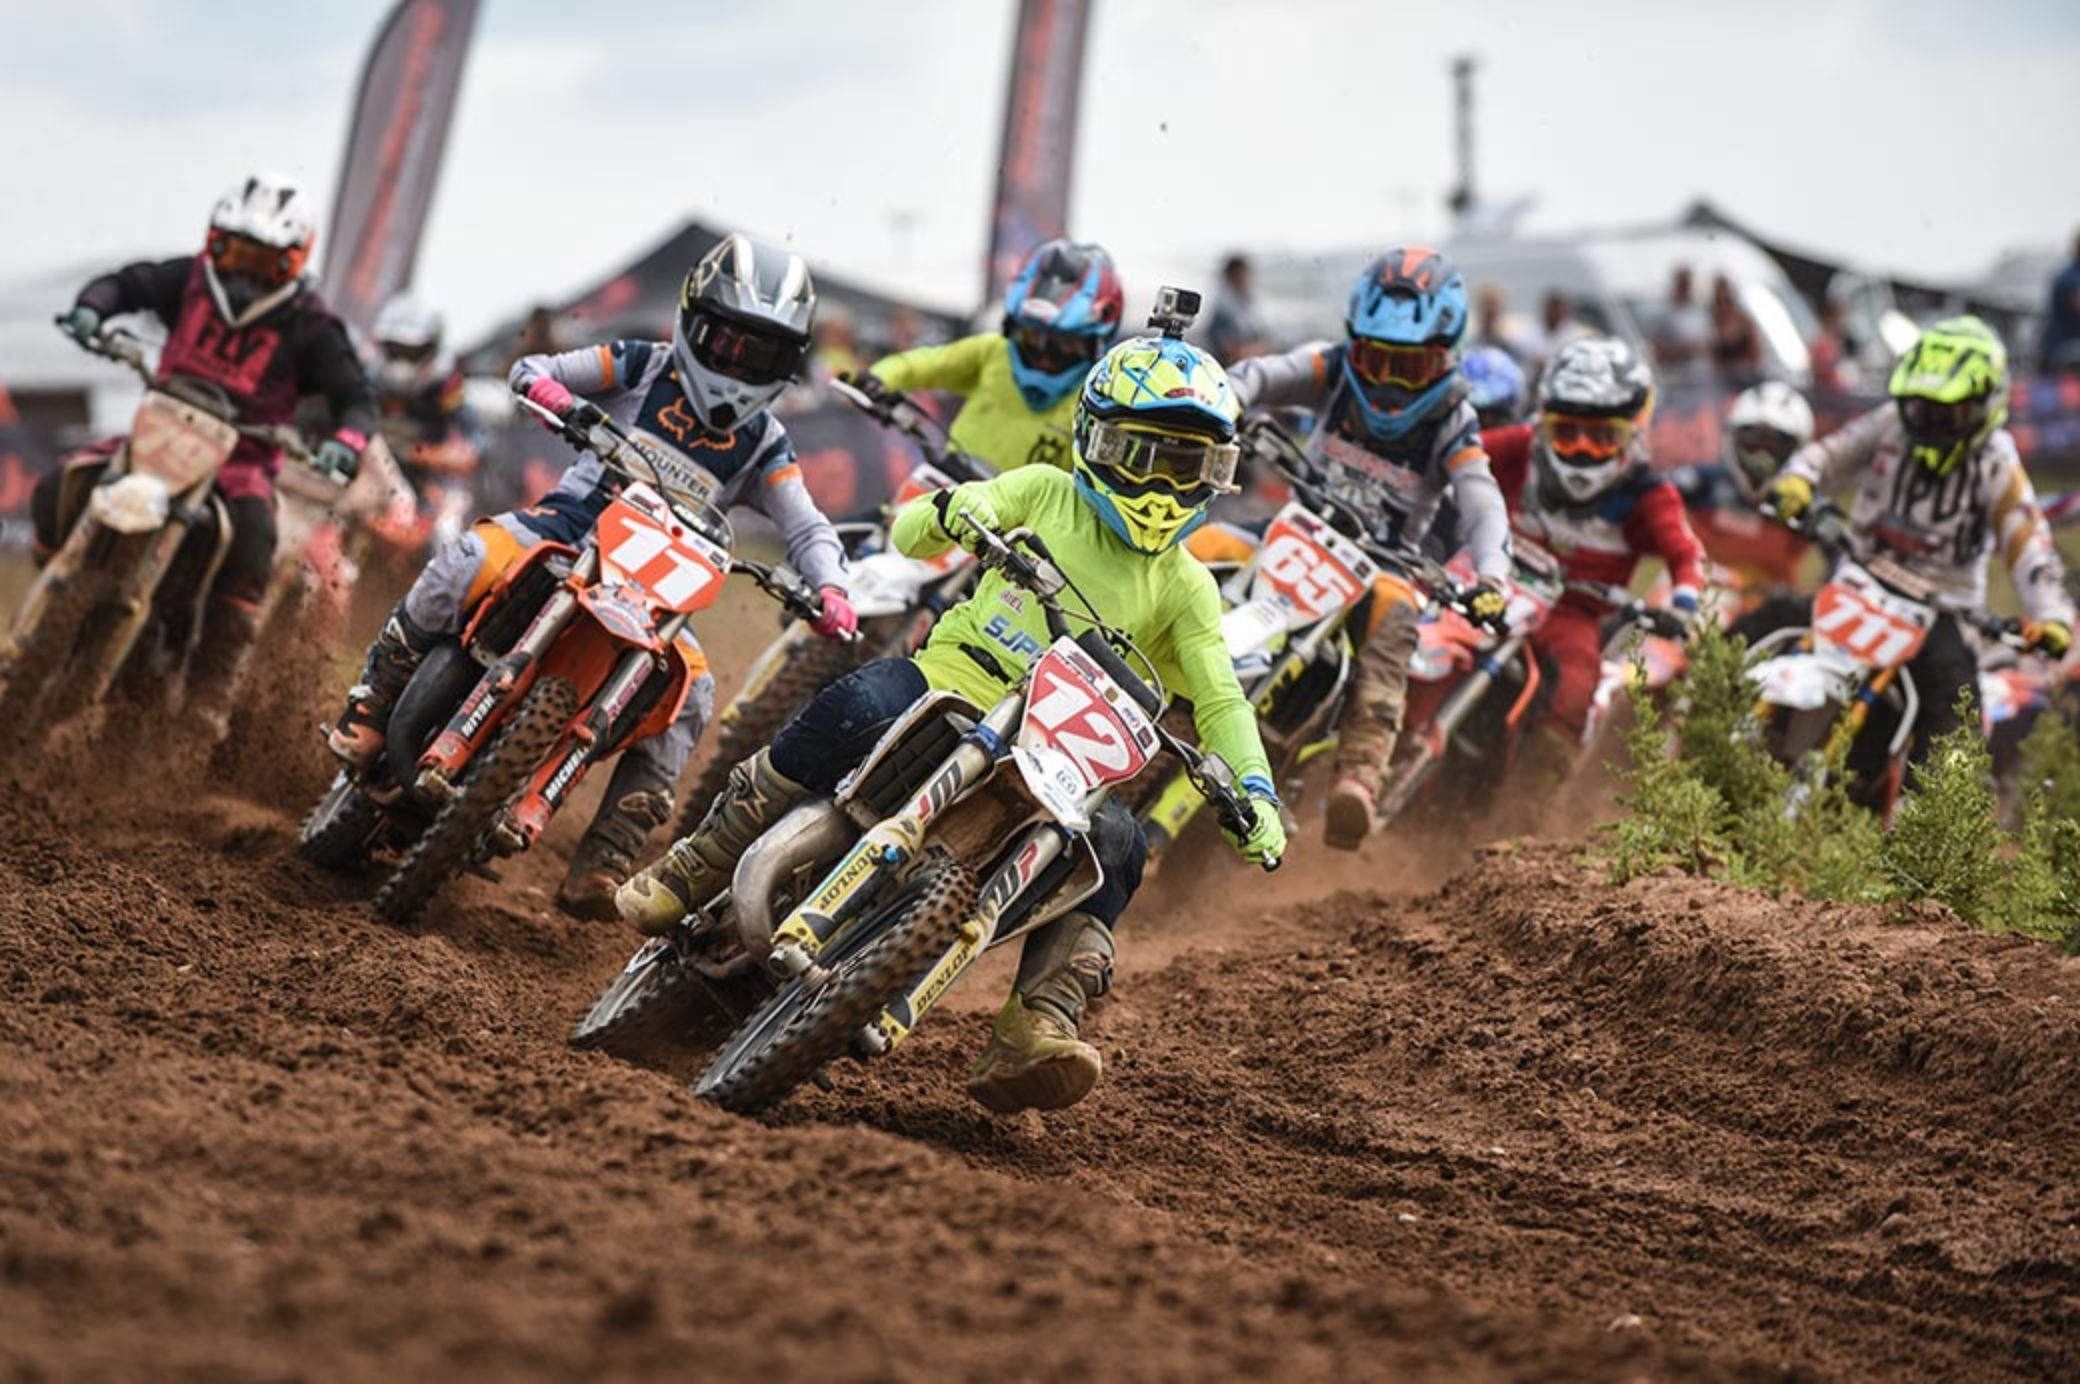 Motocross Events What's On 12 August 18 August 2019